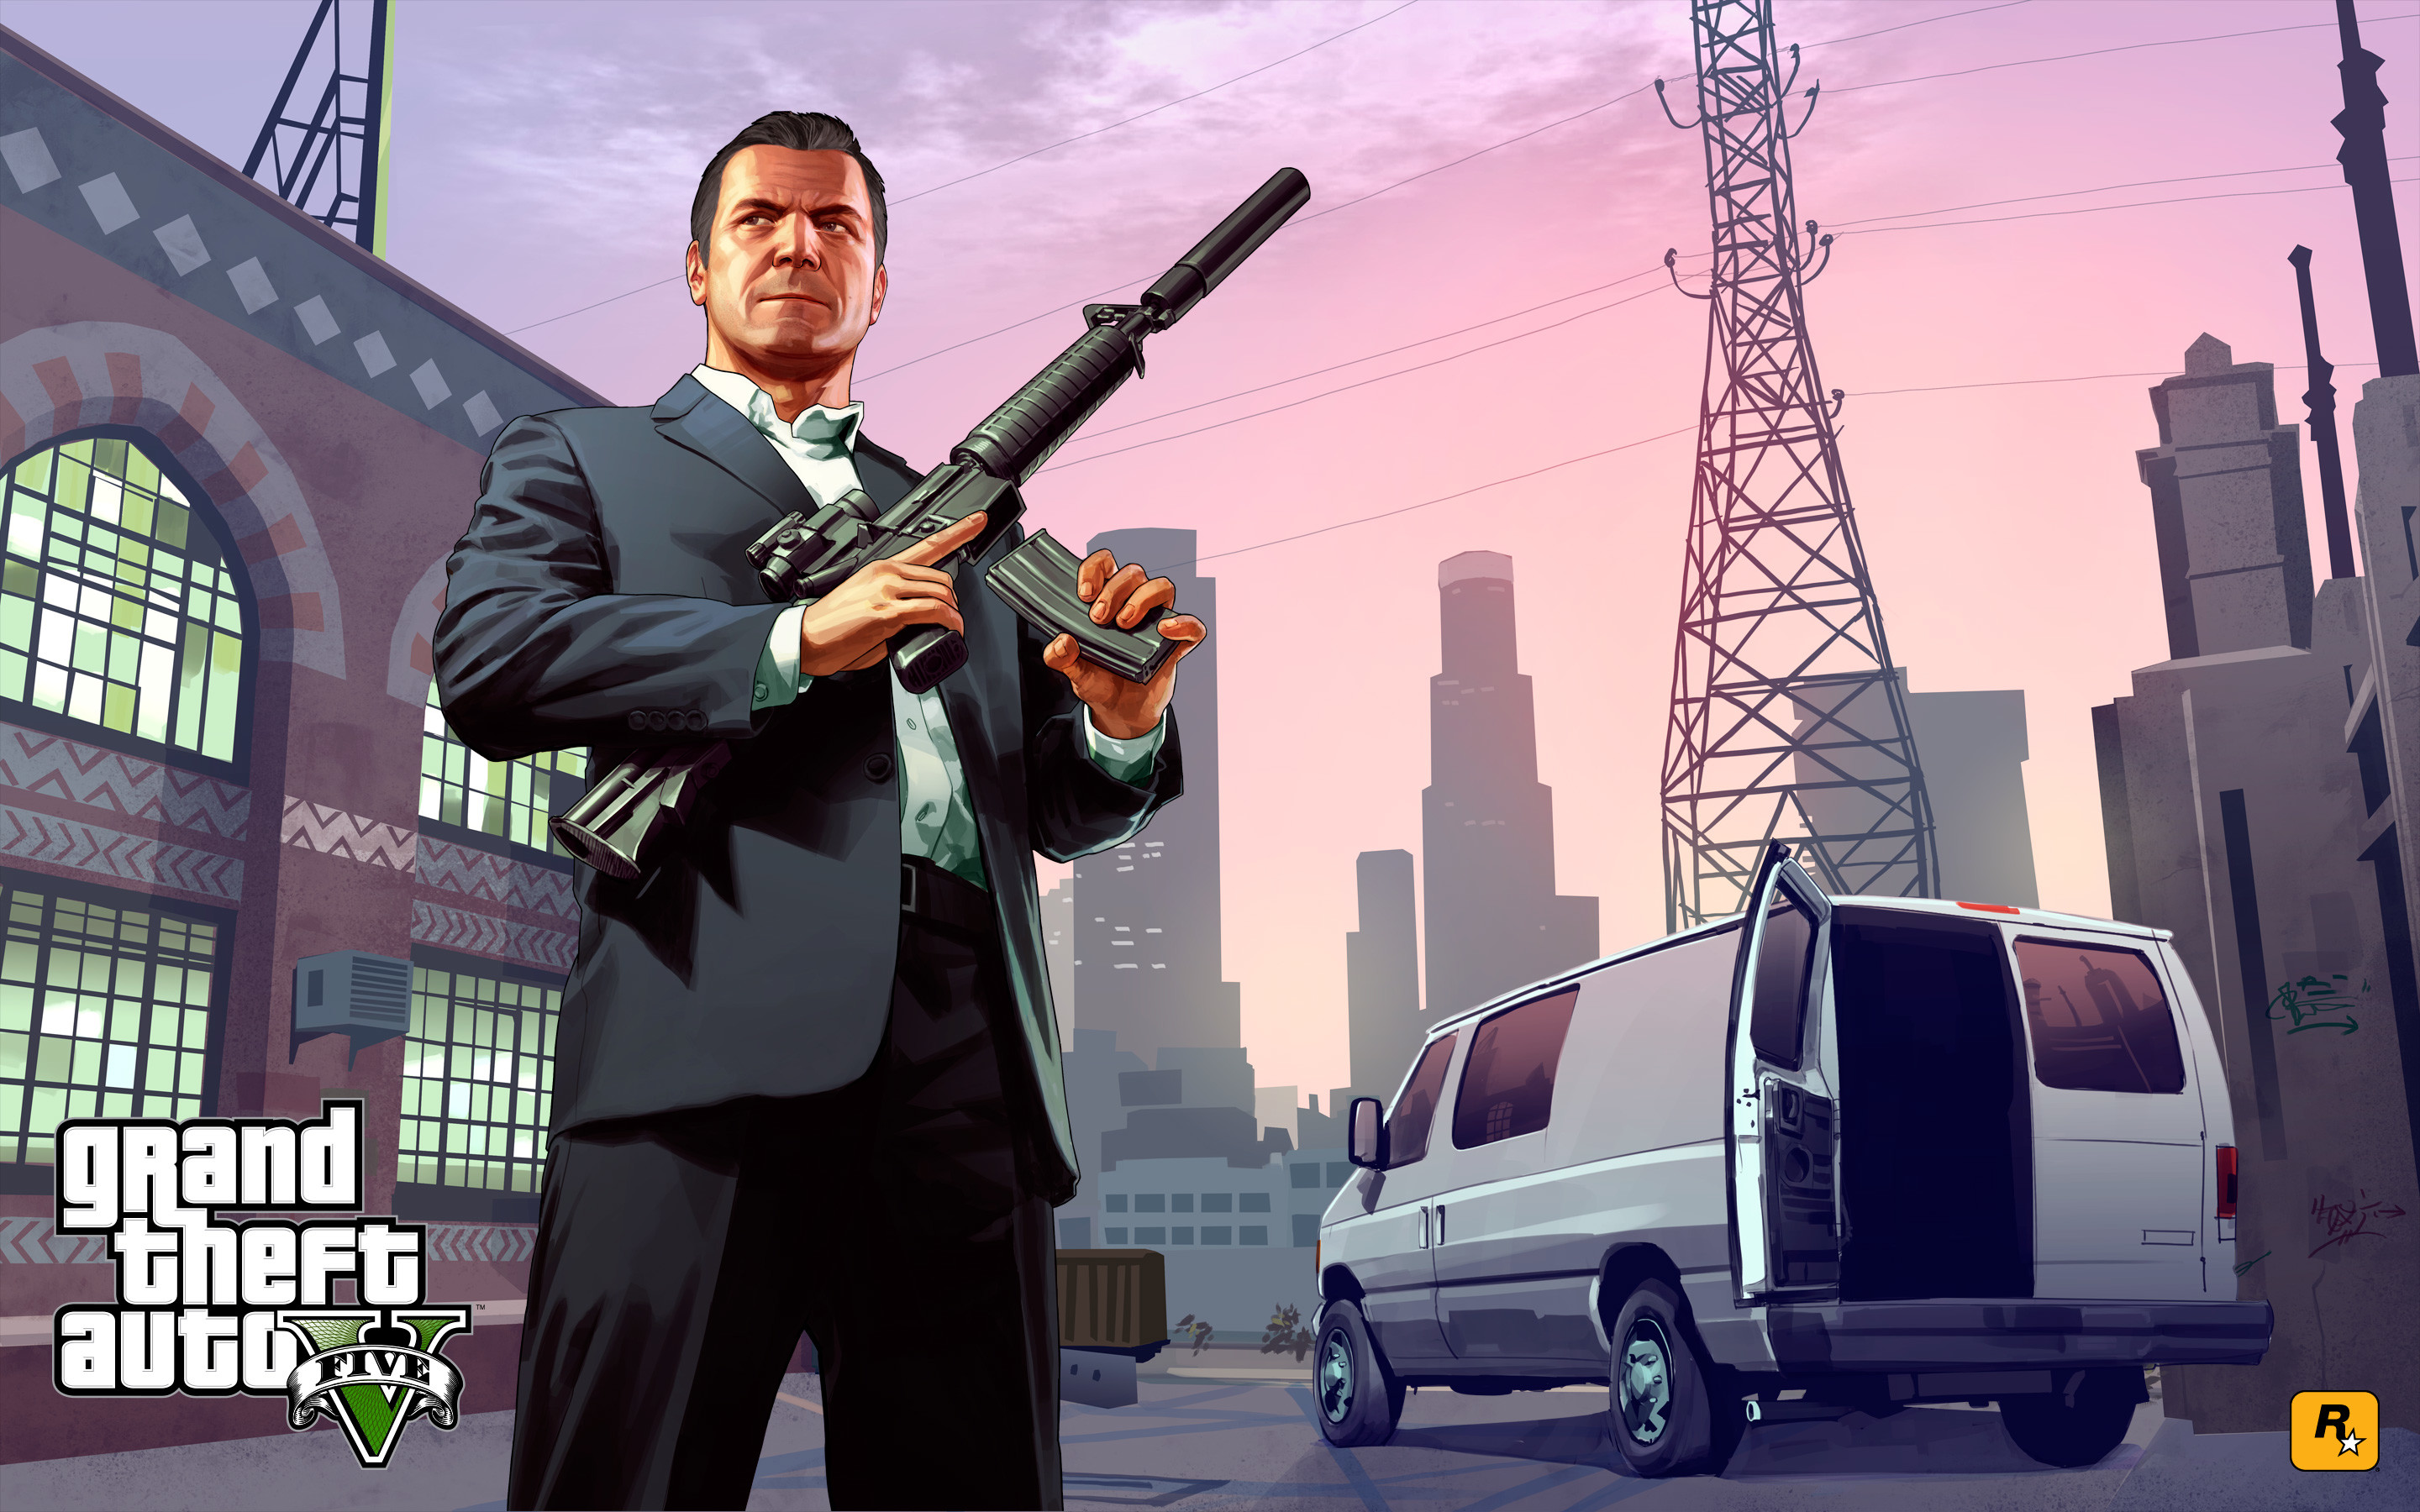 2880x1800 Franklin Sniping GTA 5 - http://1sthdwallpapers.com/franklin-sniping-gta-5 -hd-wallpapers/ | gta 5 | Pinterest | Grand theft auto, Gaming wallpapers  and ...